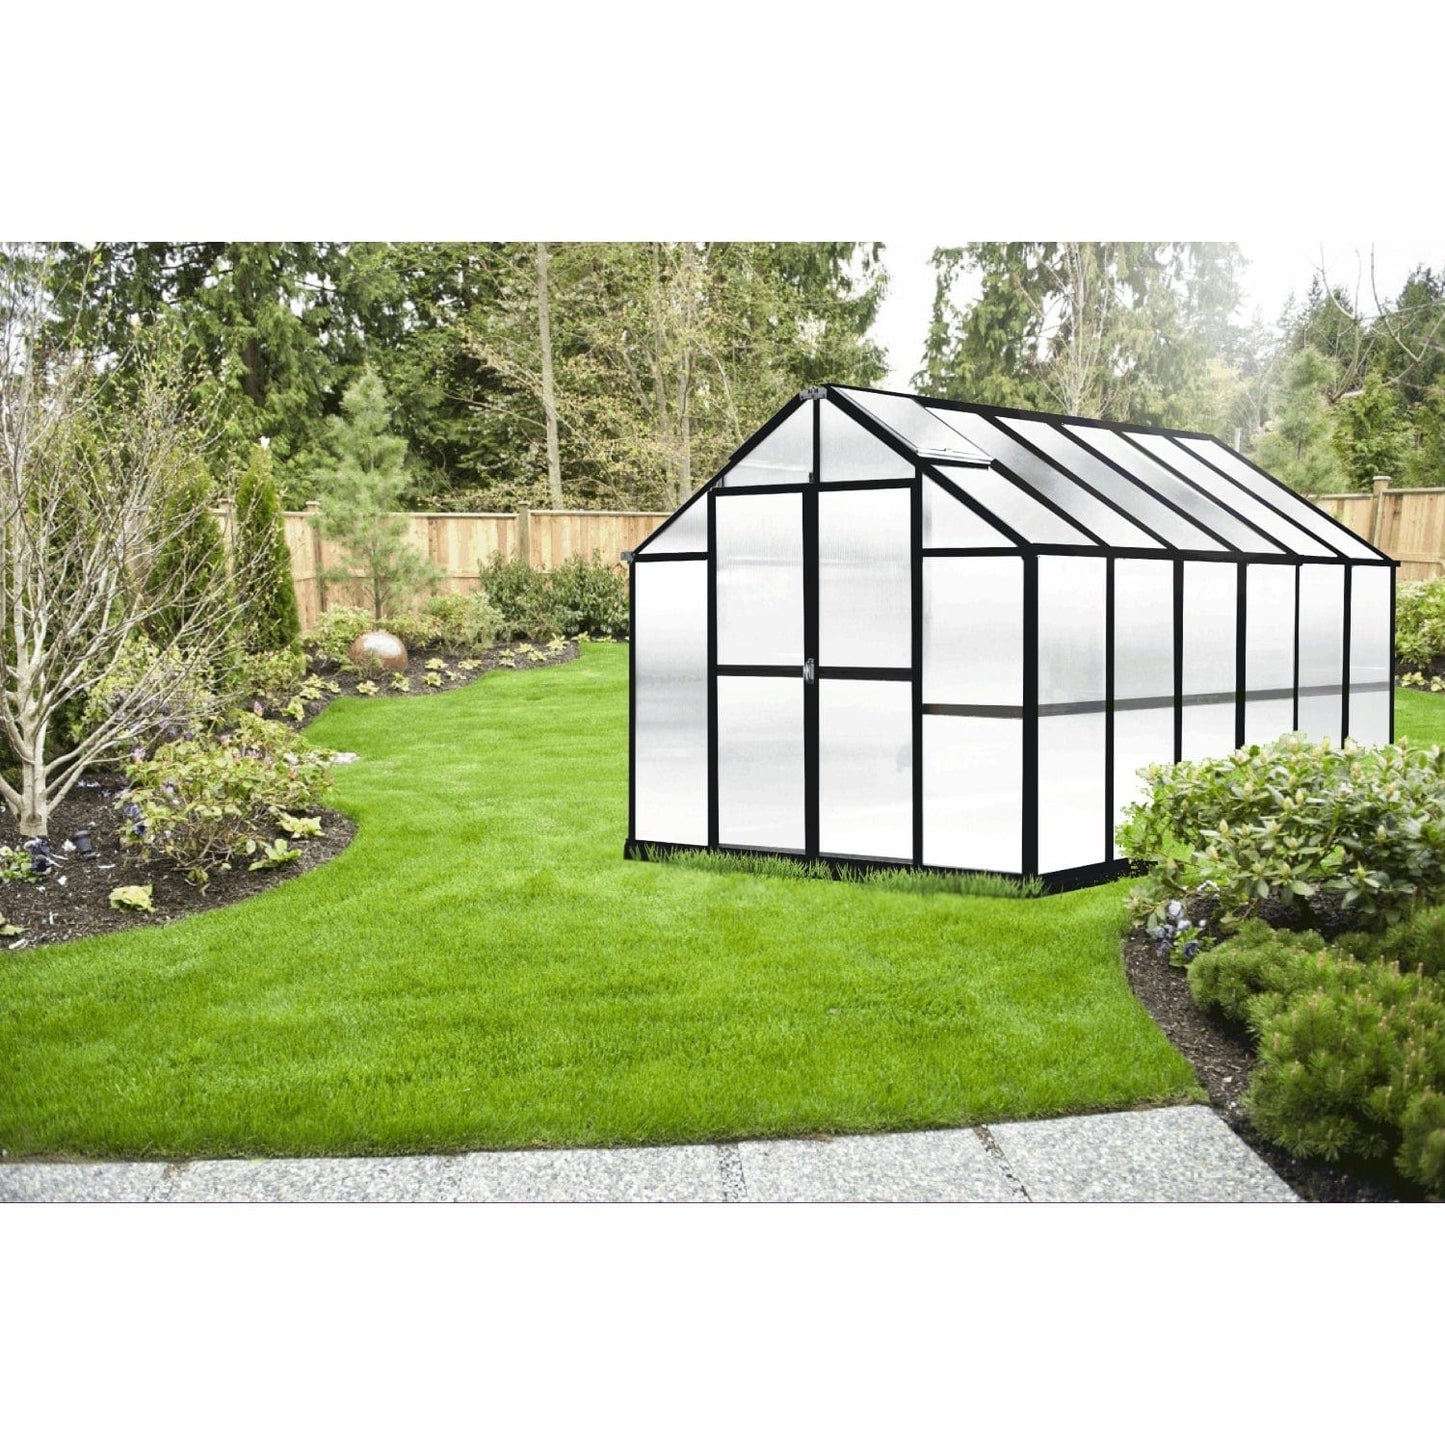 Riverstone Industries Deluxe Greenhouse Kit Riverstone | MONT Growers Edition Greenhouse - Black Finish